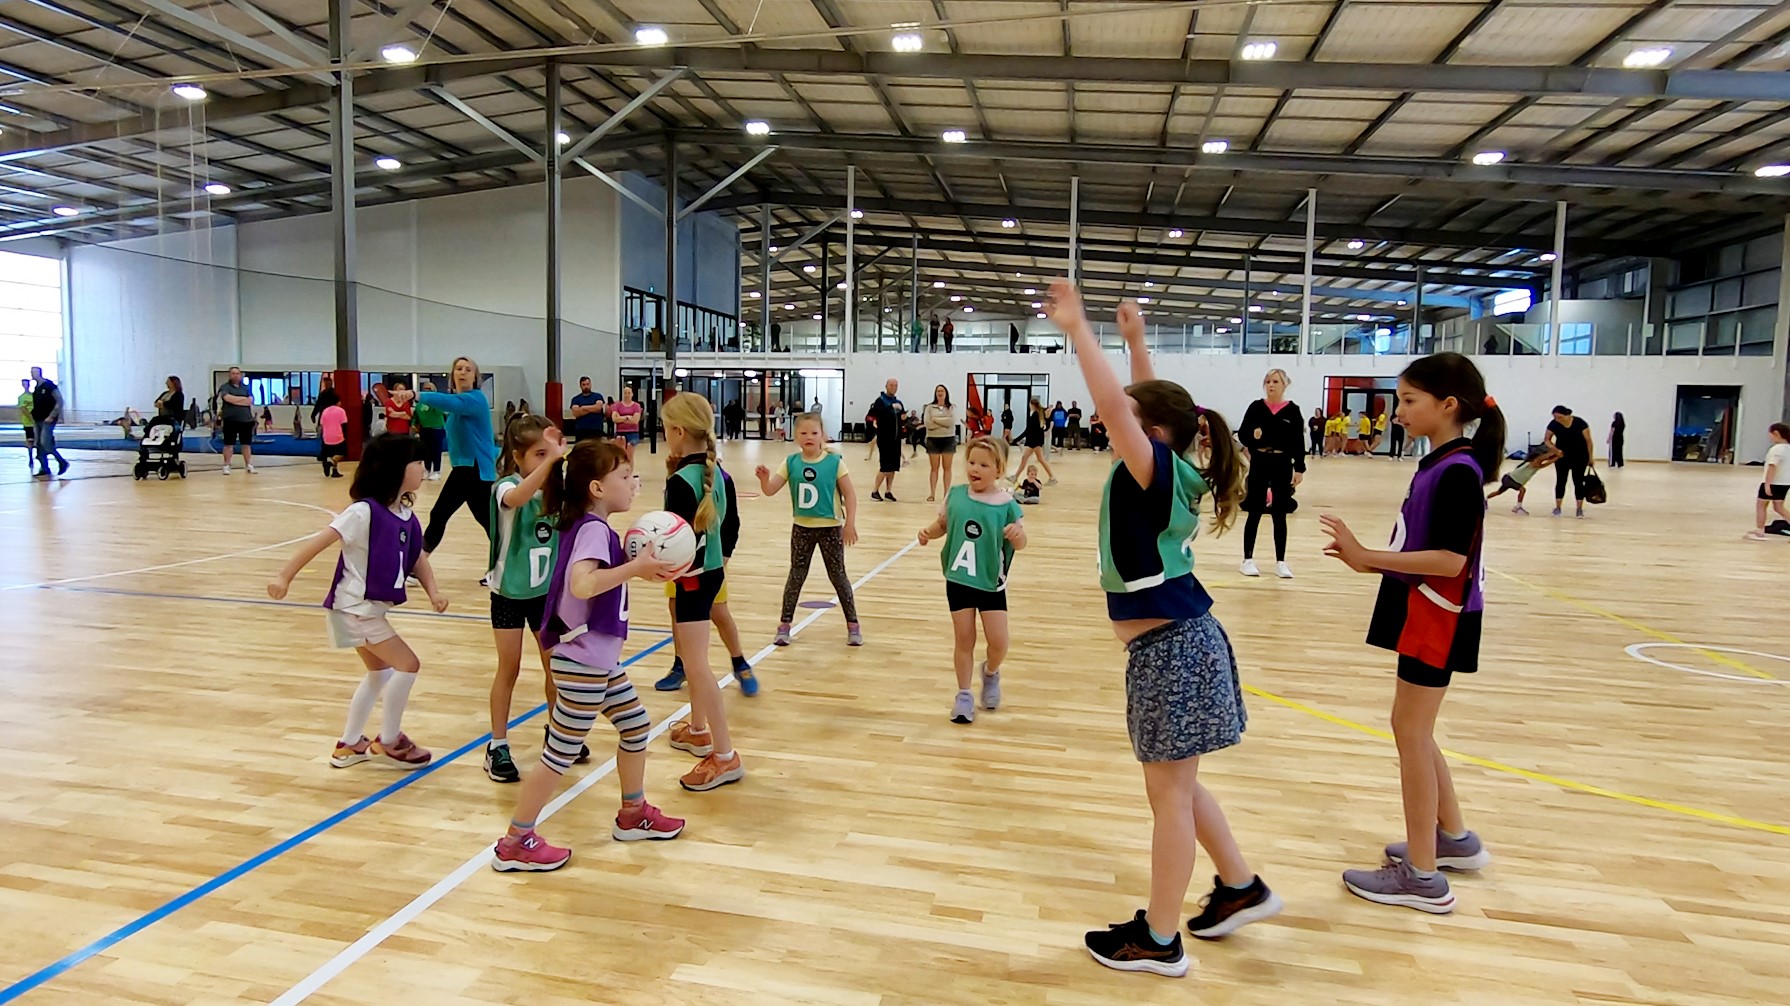 A large crowd watched a variety of sporting displays at the Christchurch Netball Centre's public...